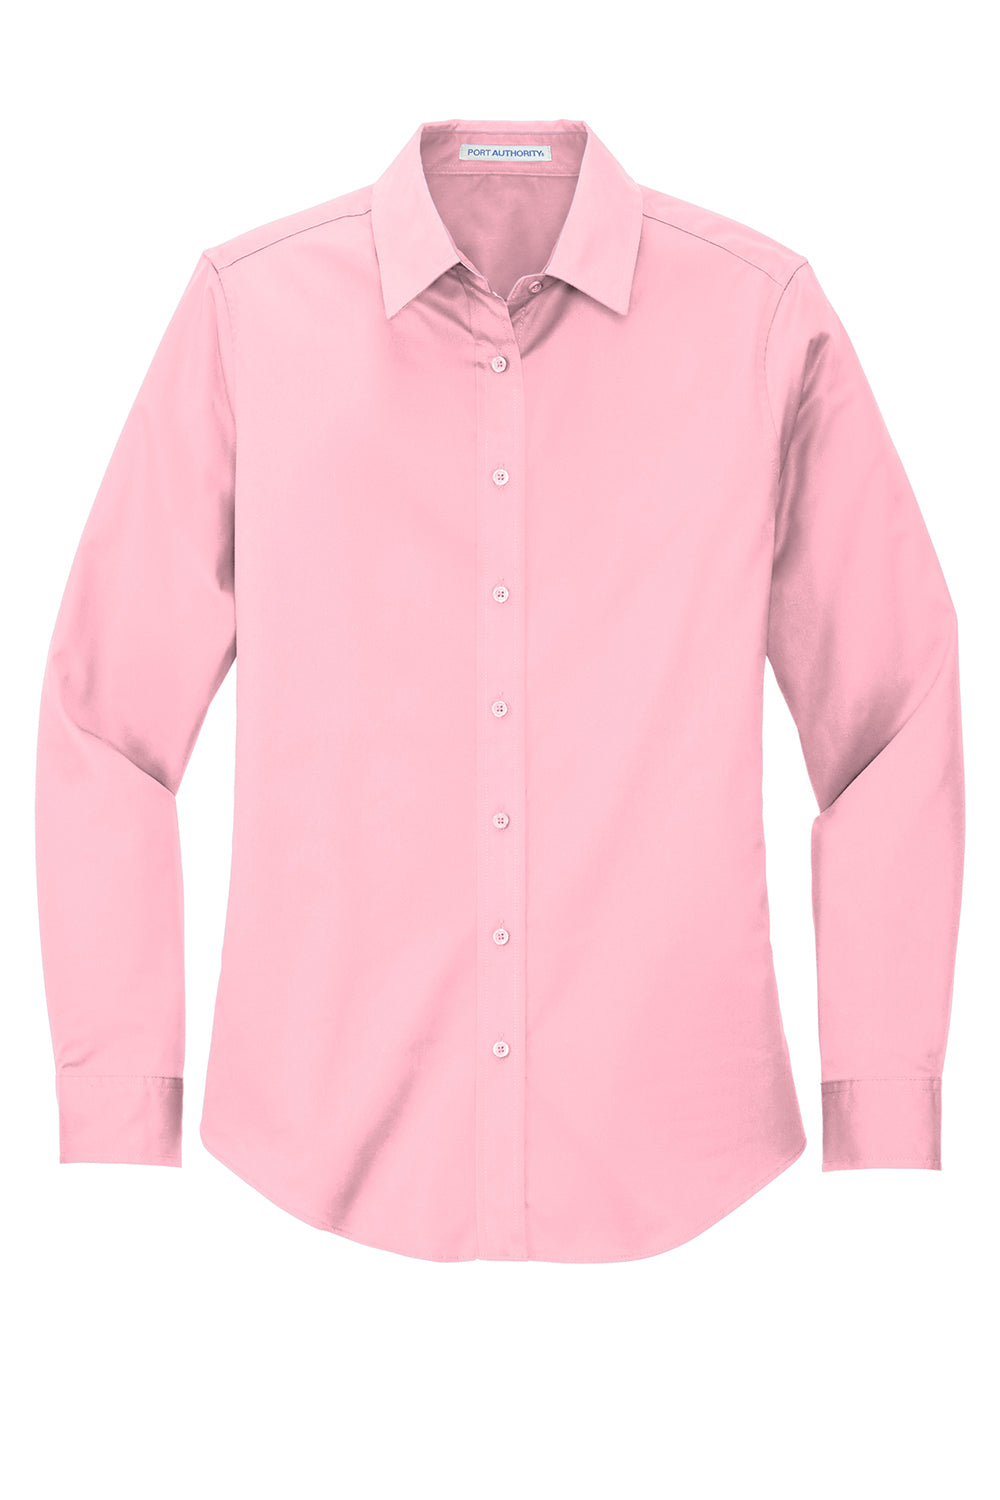 Port Authority L608 Womens Easy Care Wrinkle Resistant Long Sleeve Button Down Shirt Light Pink Flat Front